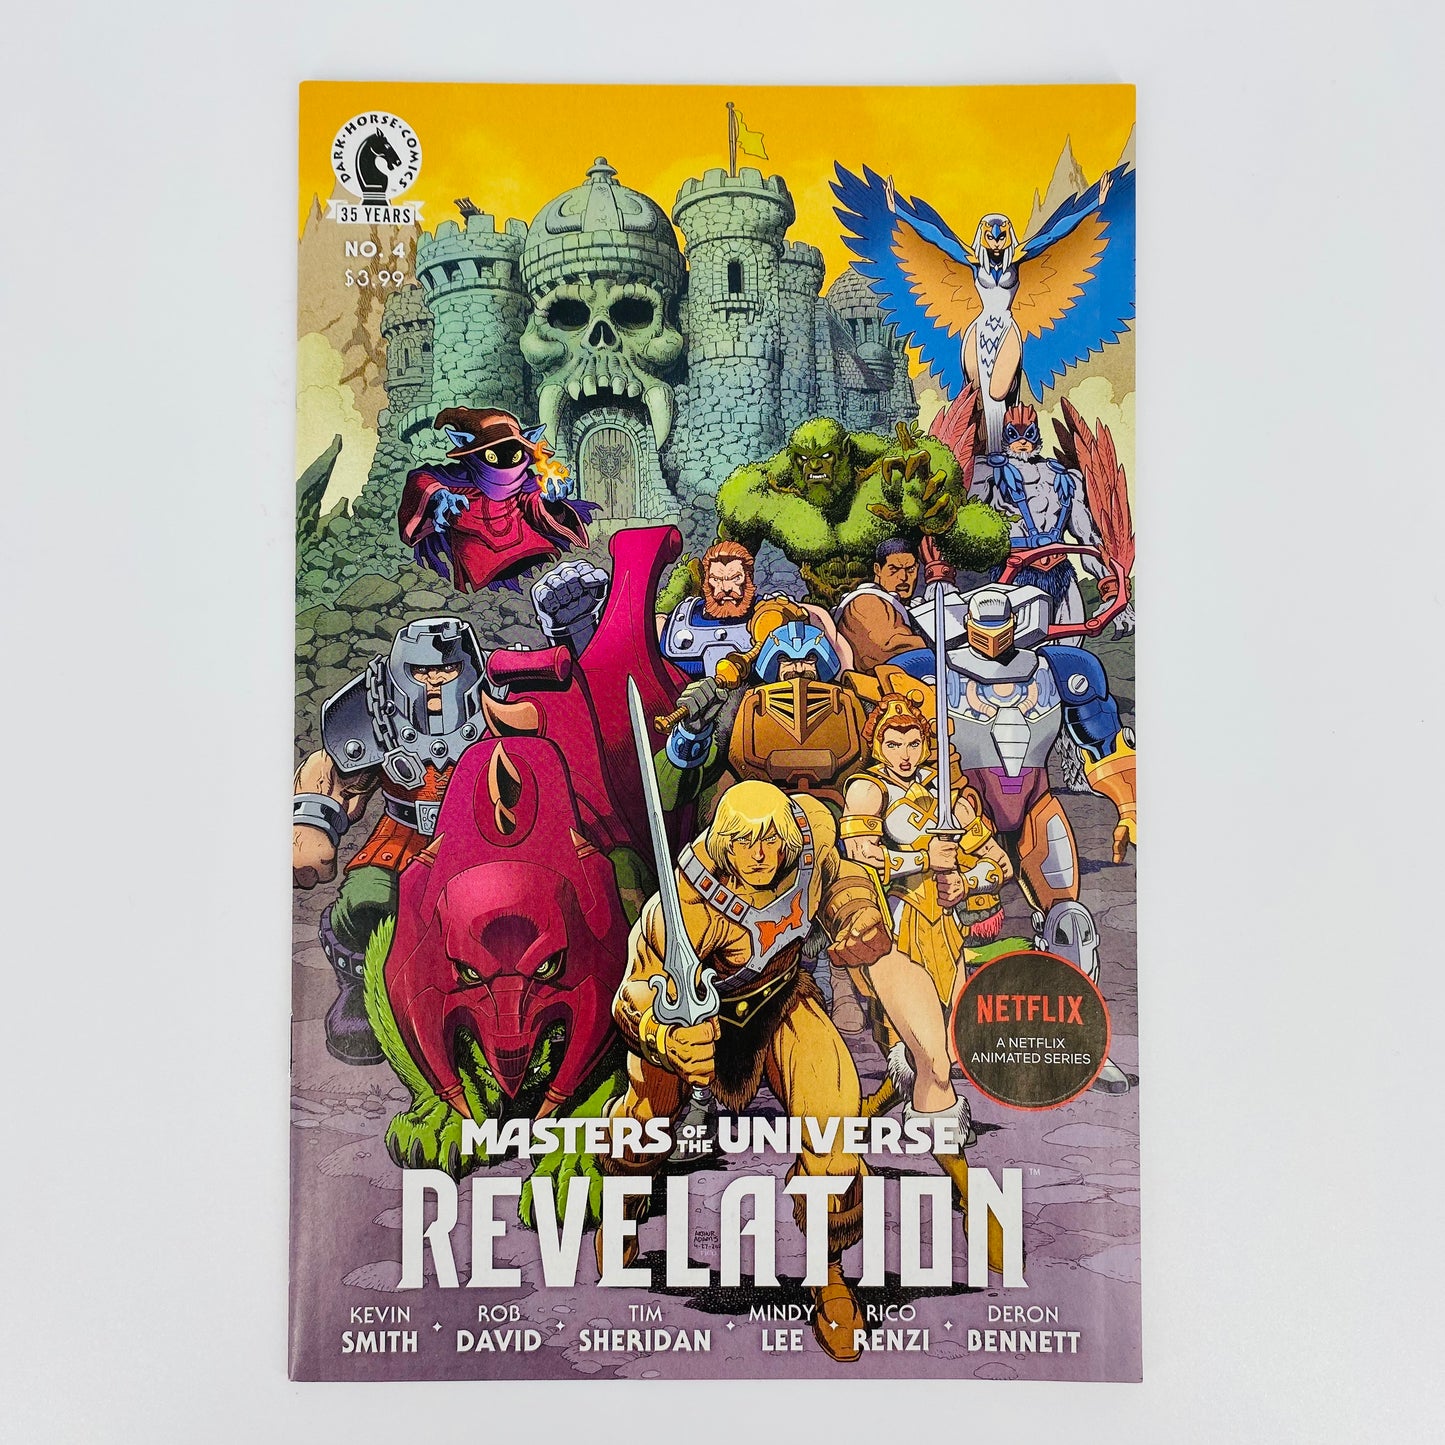 Masters of the Universe Revelation issues #1-4 alternate covers (2021) Dark Horse